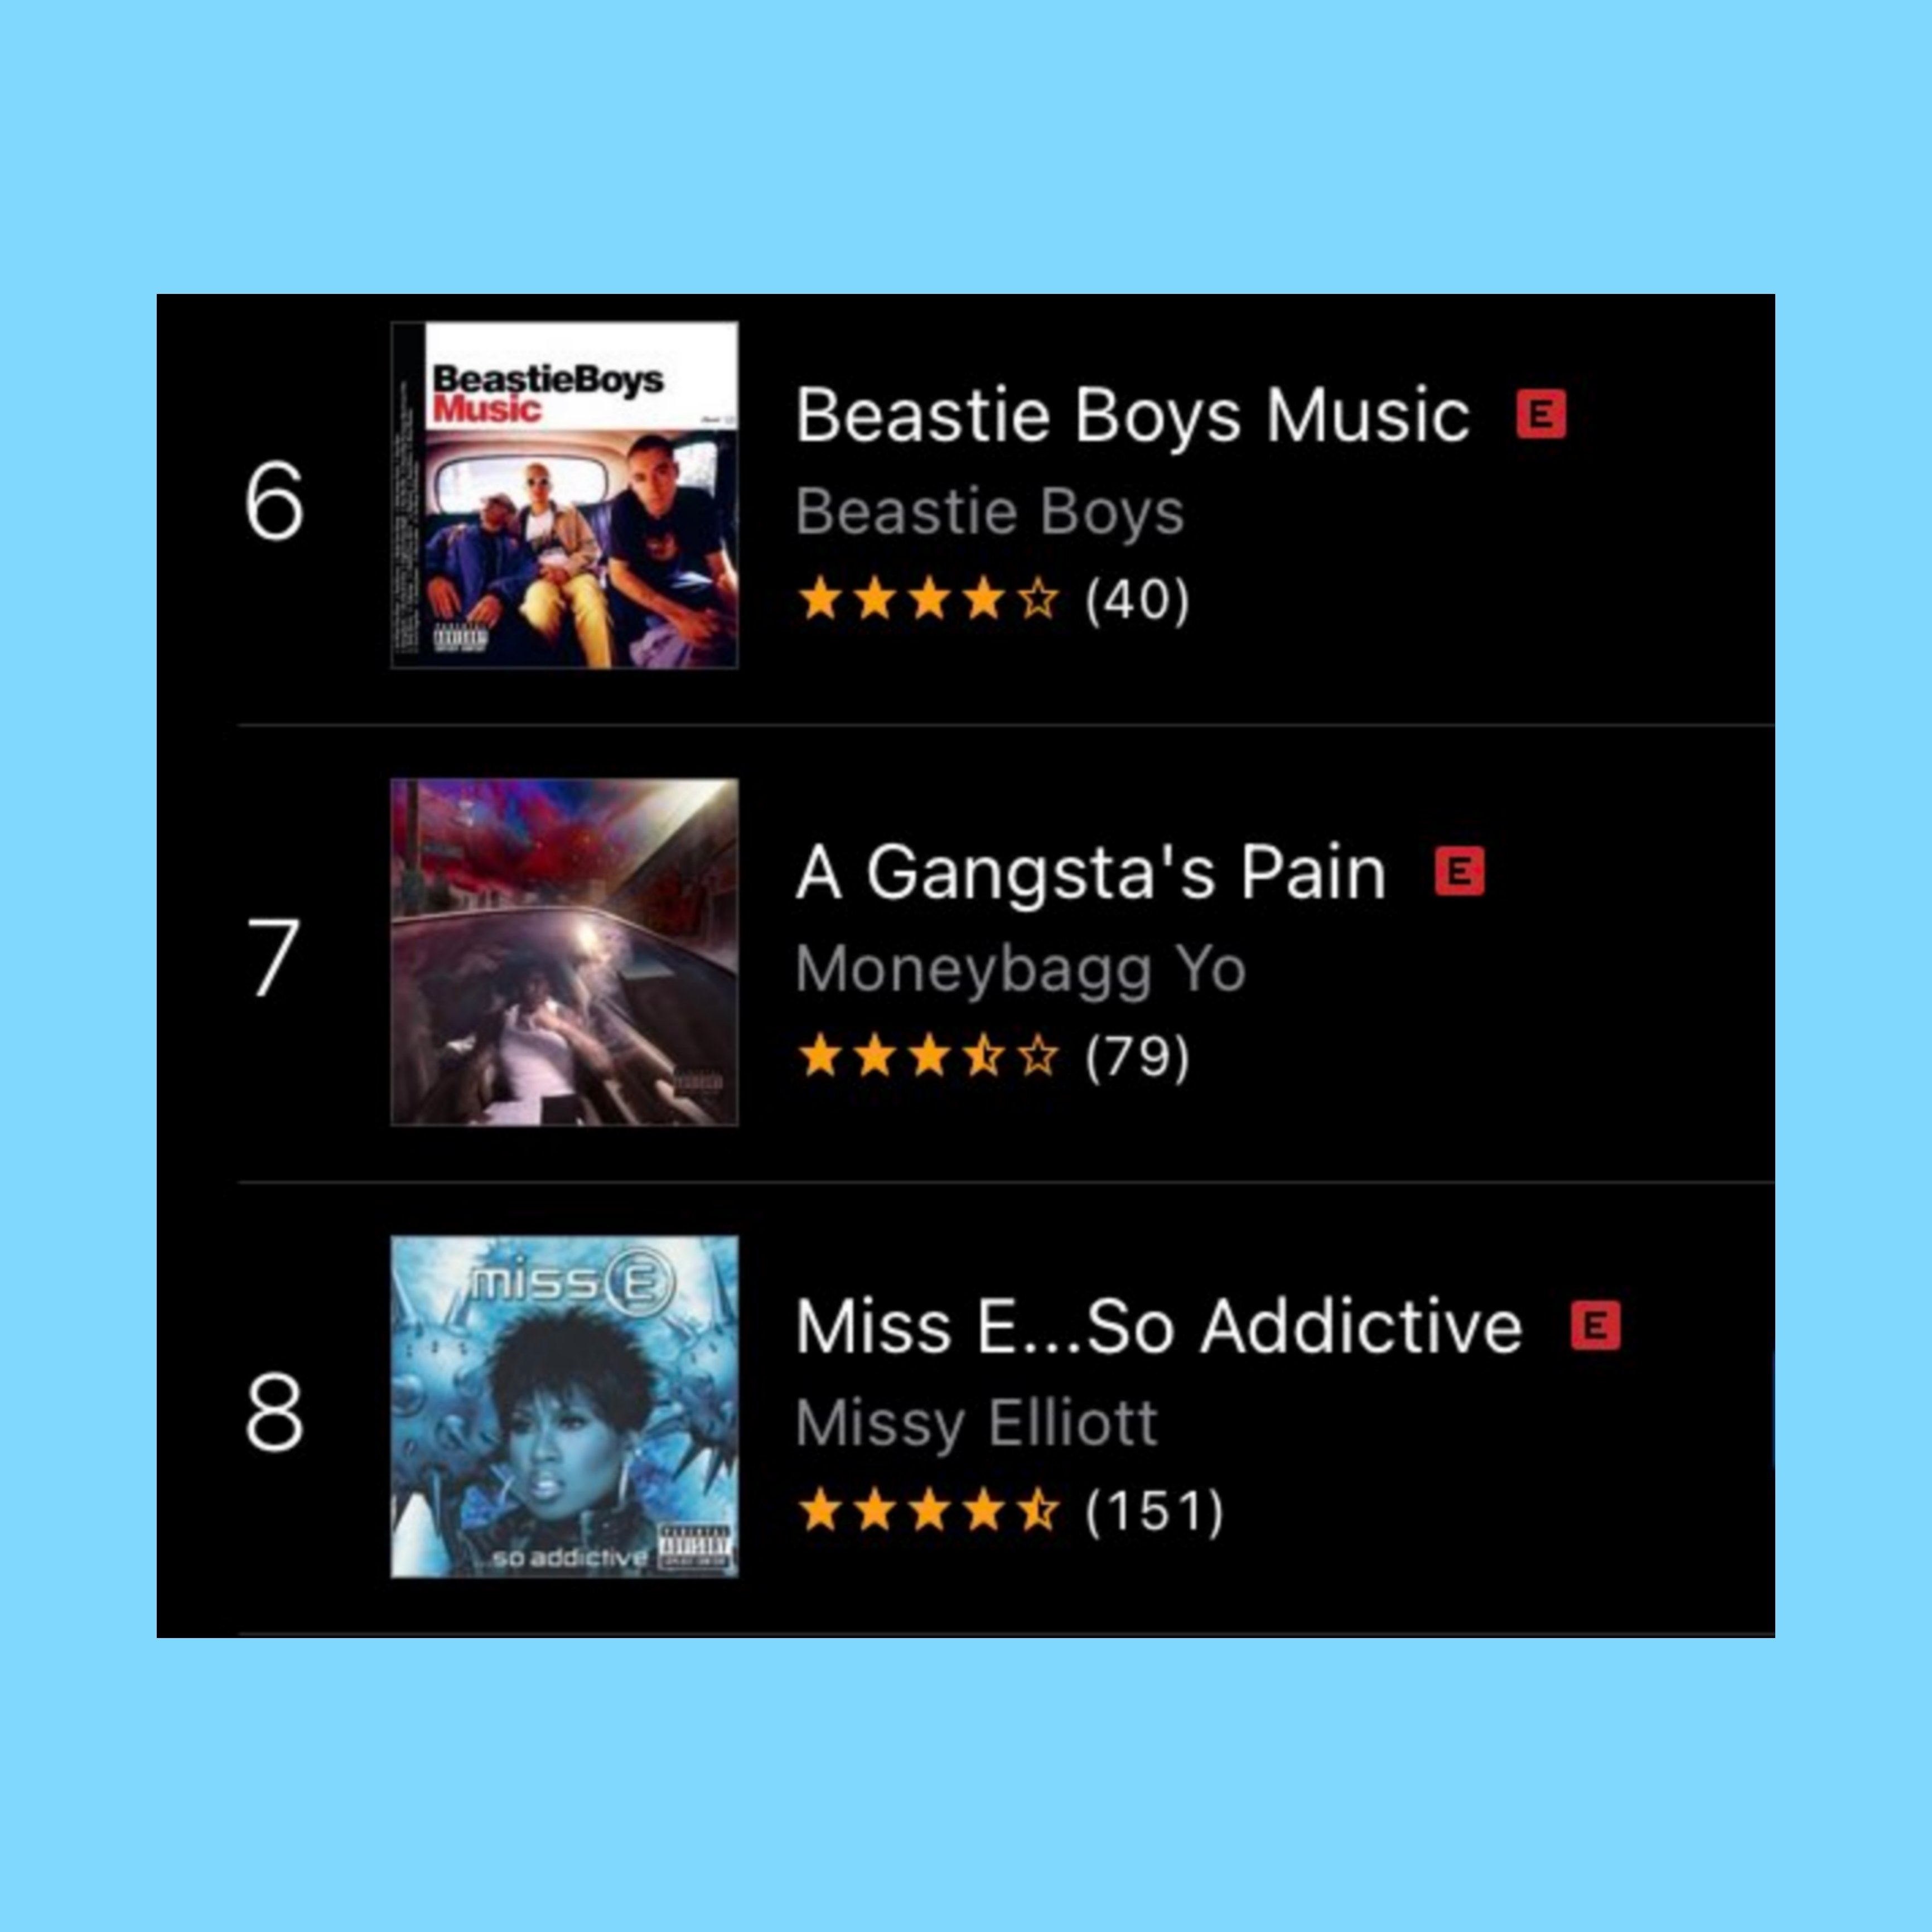 Jono #MISSYFORROCKHALL on Twitter: "Chart update! @MissyElliott Miss E...So Addictive is now charting at on the iTunes Top 100 Album Chart &amp; No.8 on the iTunes Rap/Hip-Hop chart! #MissyElliott #SupaFriends #SoAddictive